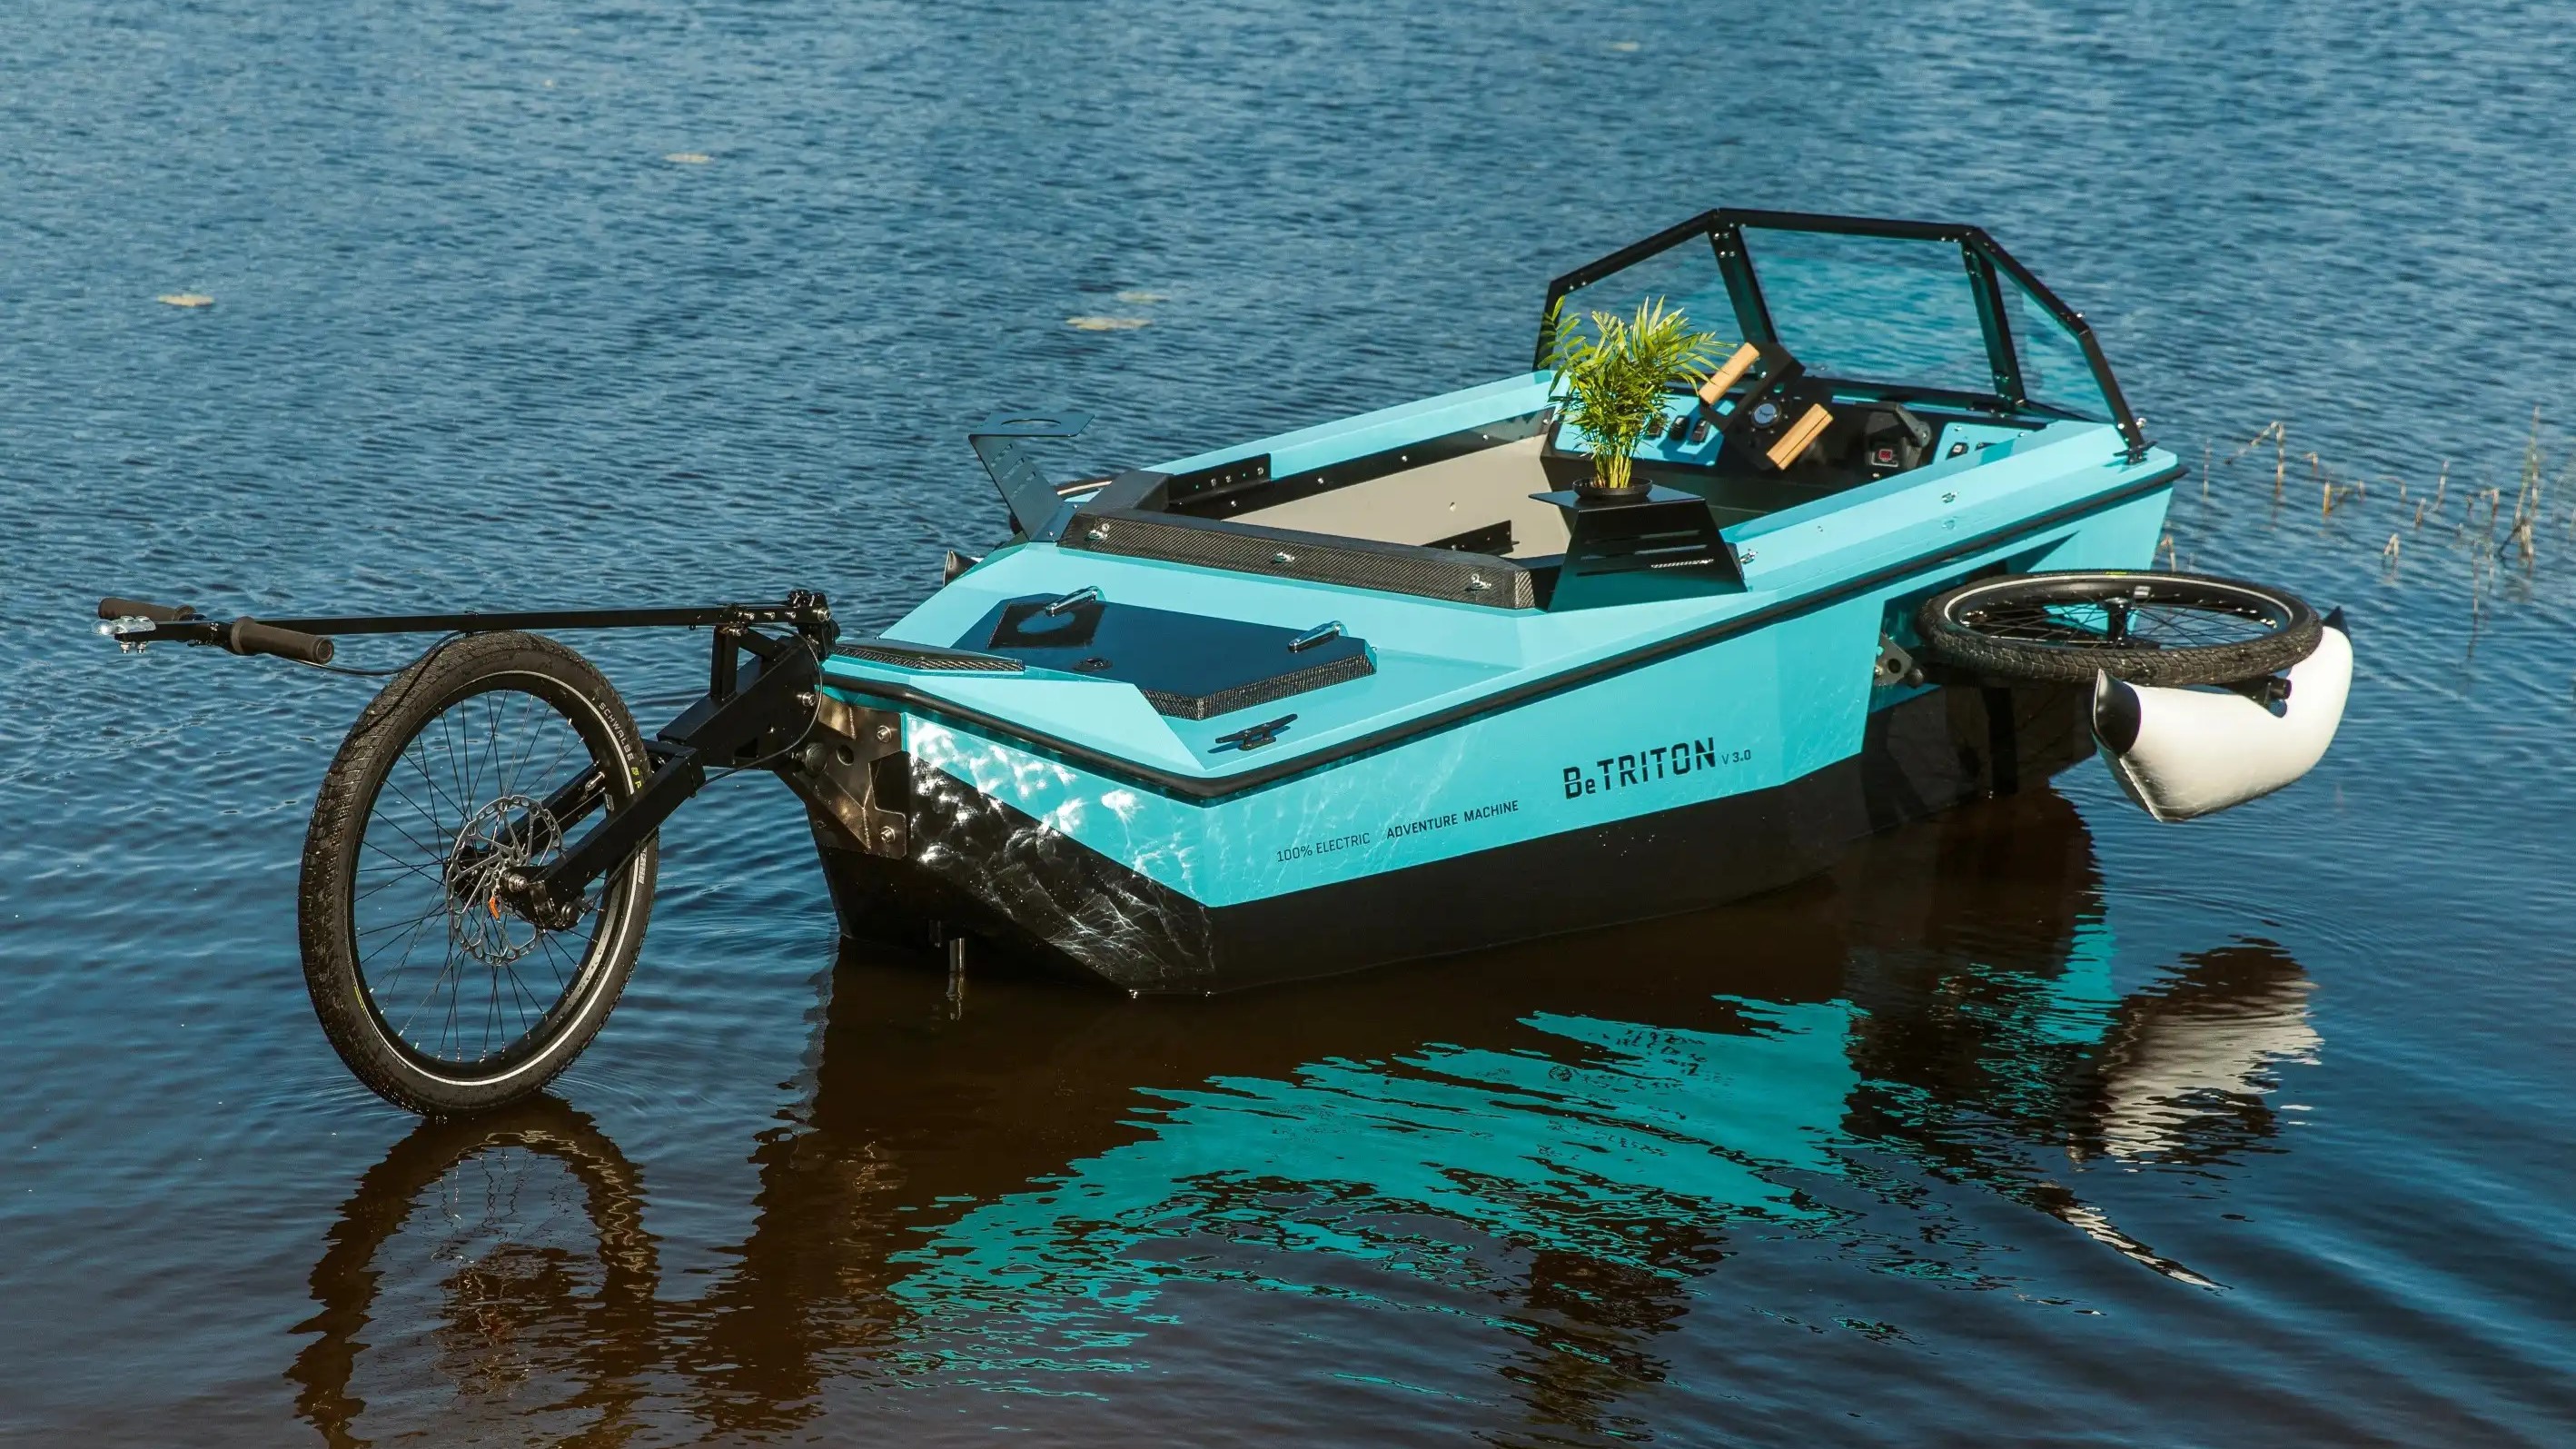 It's a boat! It's a camper! It's a… beTRITON bicycle?